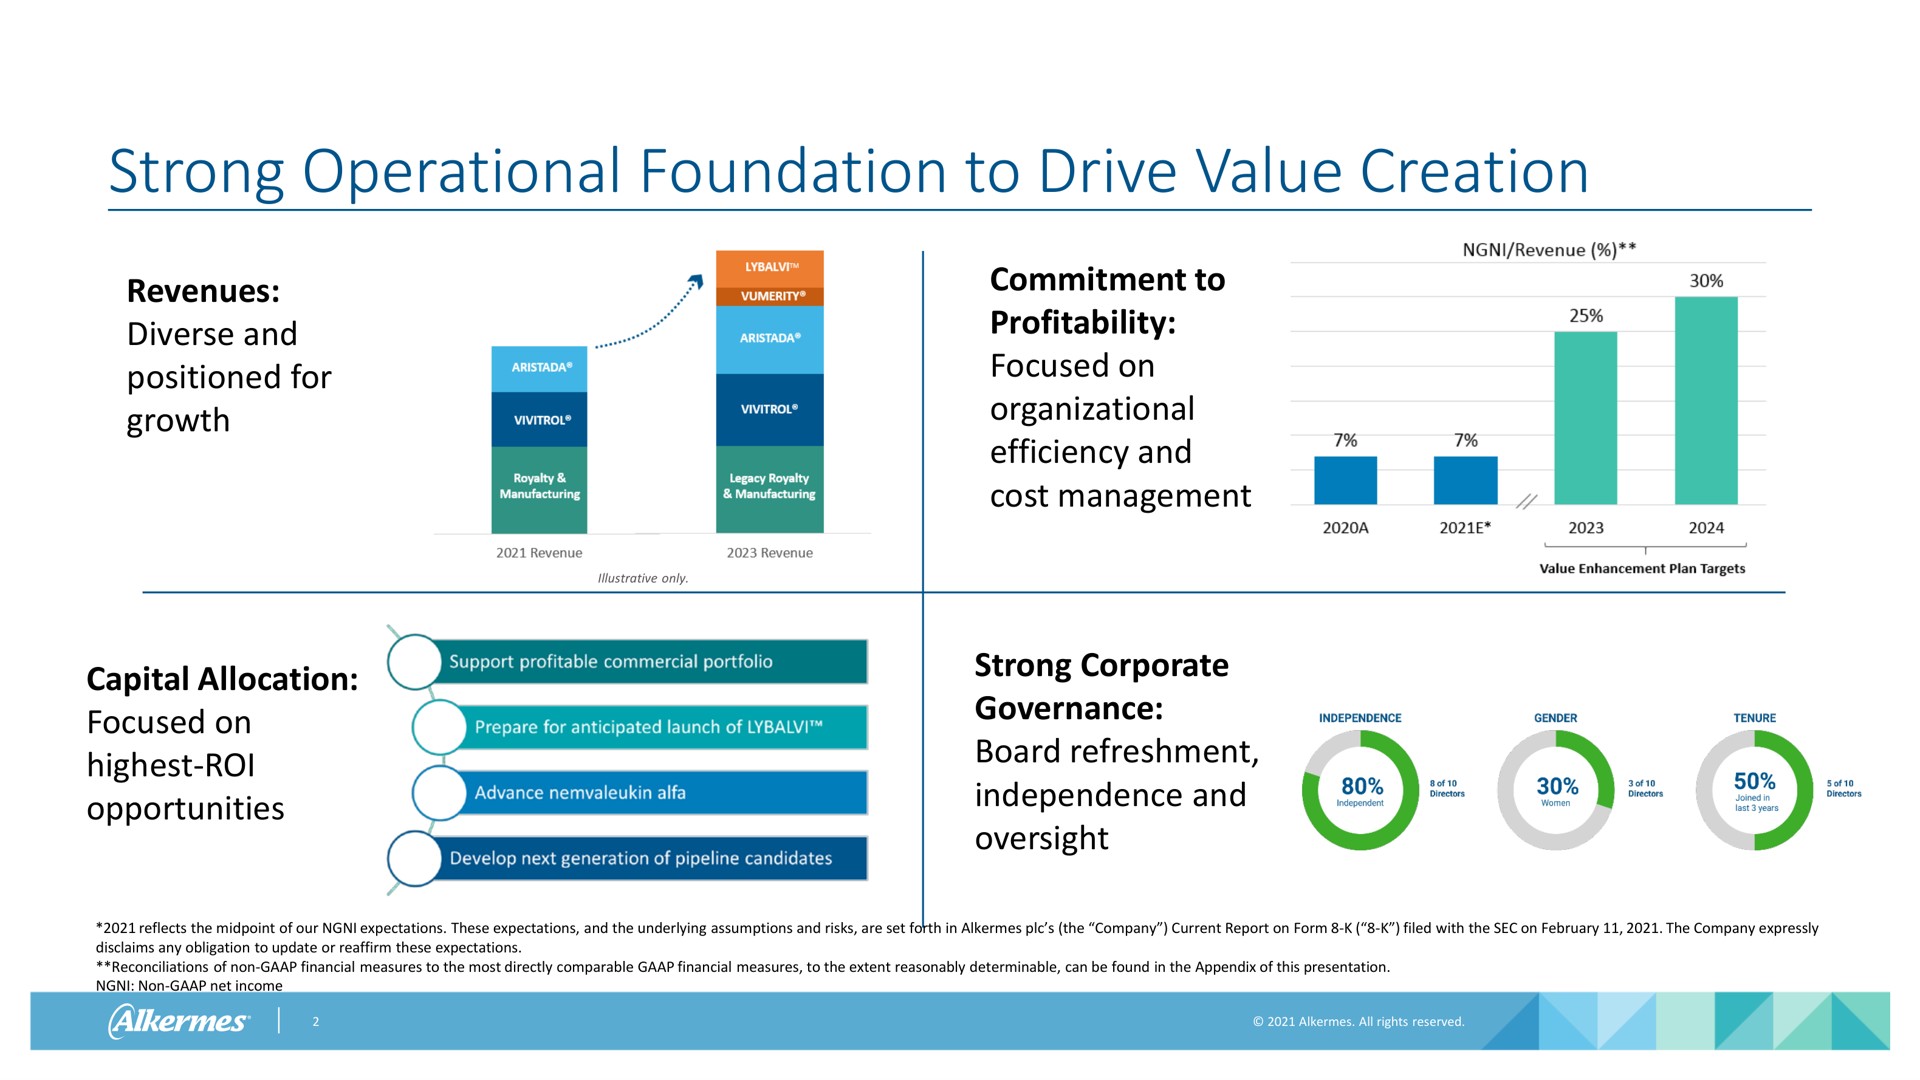 strong operational foundation to drive value creation revenues diverse and positioned for growth capital allocation focused on highest roi opportunities commitment to profitability focused on organizational efficiency and cost management strong corporate governance board refreshment independence and oversight reflects the of our expectations these expectations and the underlying assumptions and risks are set forth in alkermes the company current report on form filed with the sec on the company expressly disclaims any obligation to update or reaffirm these expectations reconciliations of non financial measures to the most directly comparable financial measures to the extent reasonably determinable can be found in the appendix of this presentation non net income | Alkermes